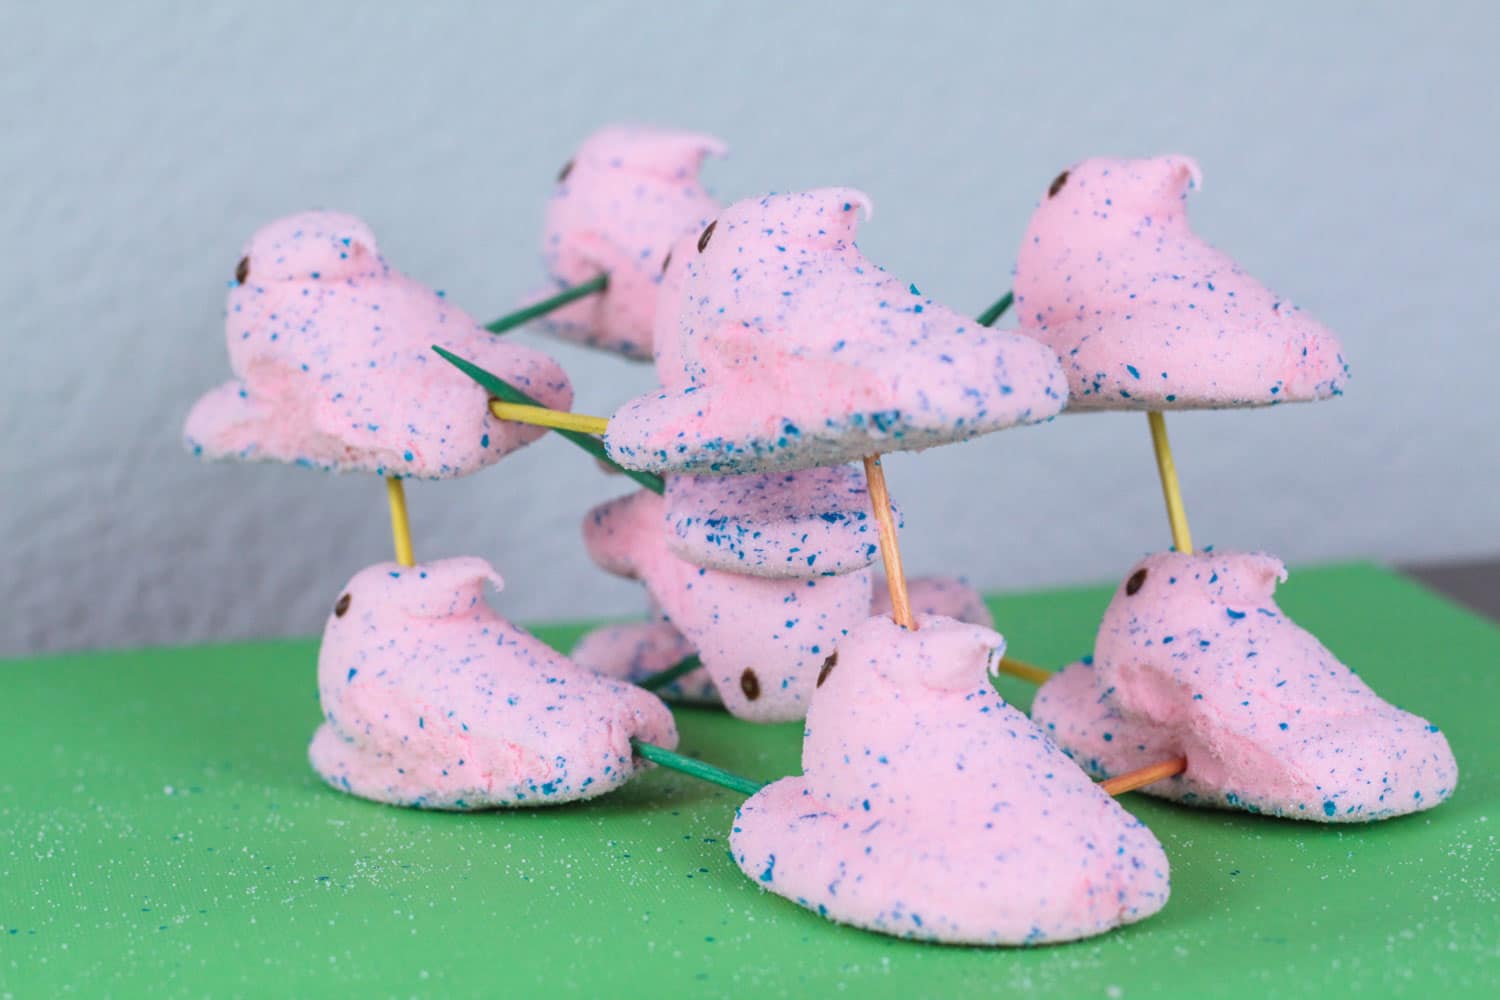 Peeps are super fun to get at Easter. But if you have some leftover, try these Peeps marshmallow engineering activities! The marshmallow activities and marshmallow STEM challenge will delight your kids. Peeps STEM activities are the best!